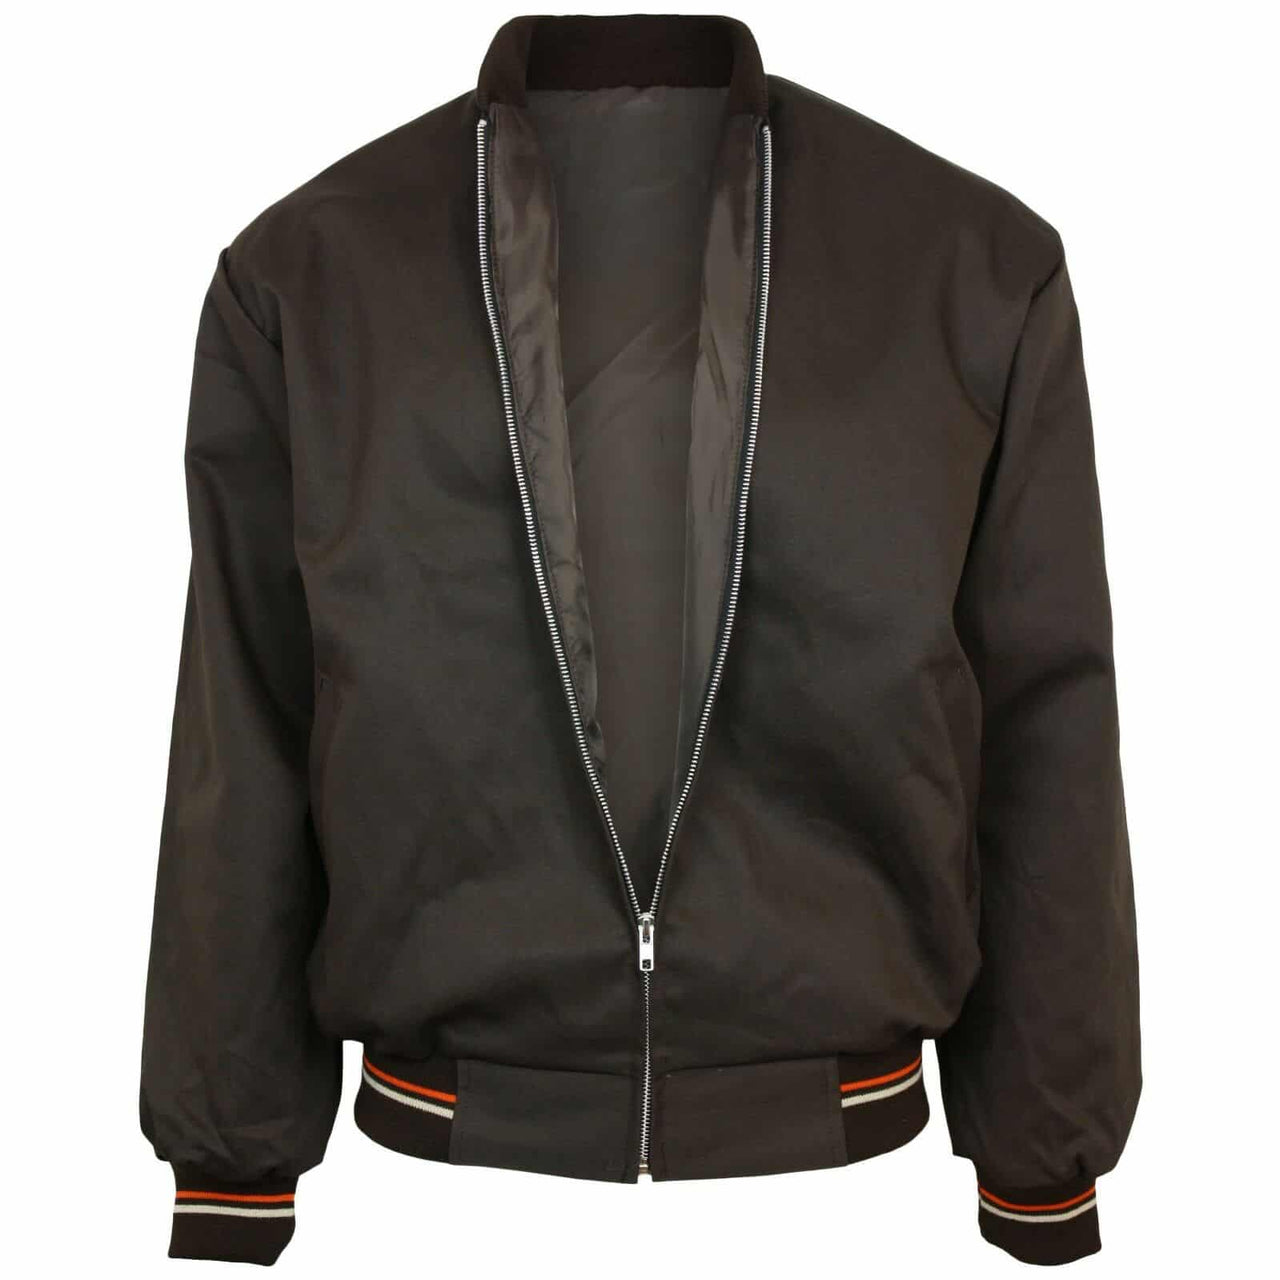 Brown Monkey Jacket by Relco London